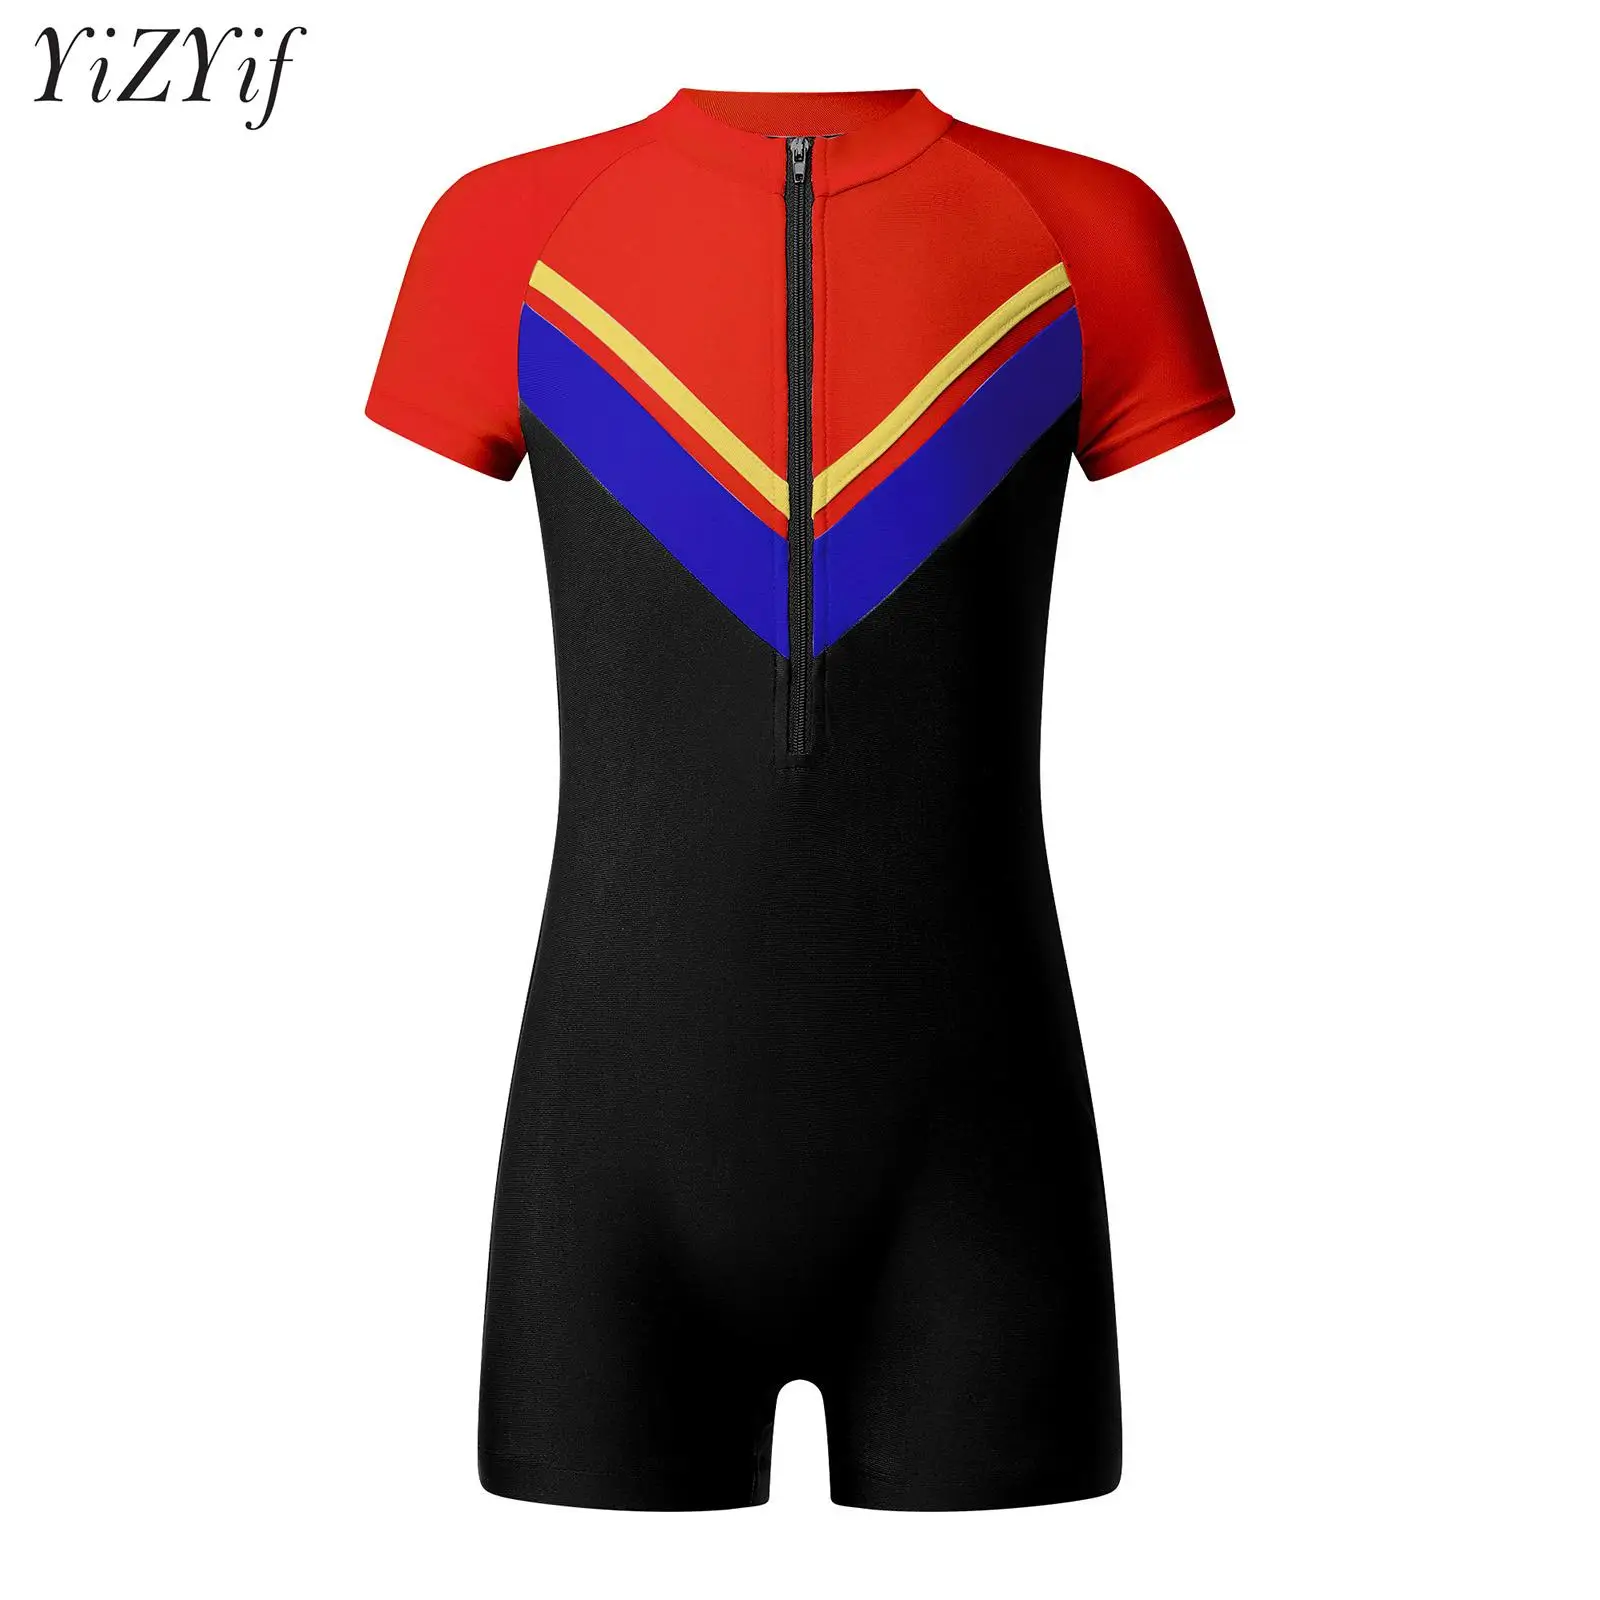 

Kids Girls Short Sleeve Front Zipper Athletic Swimwear Quick Dry One Piece Swimsuit UV Rash Guard Sport Bathing Suit for Diving